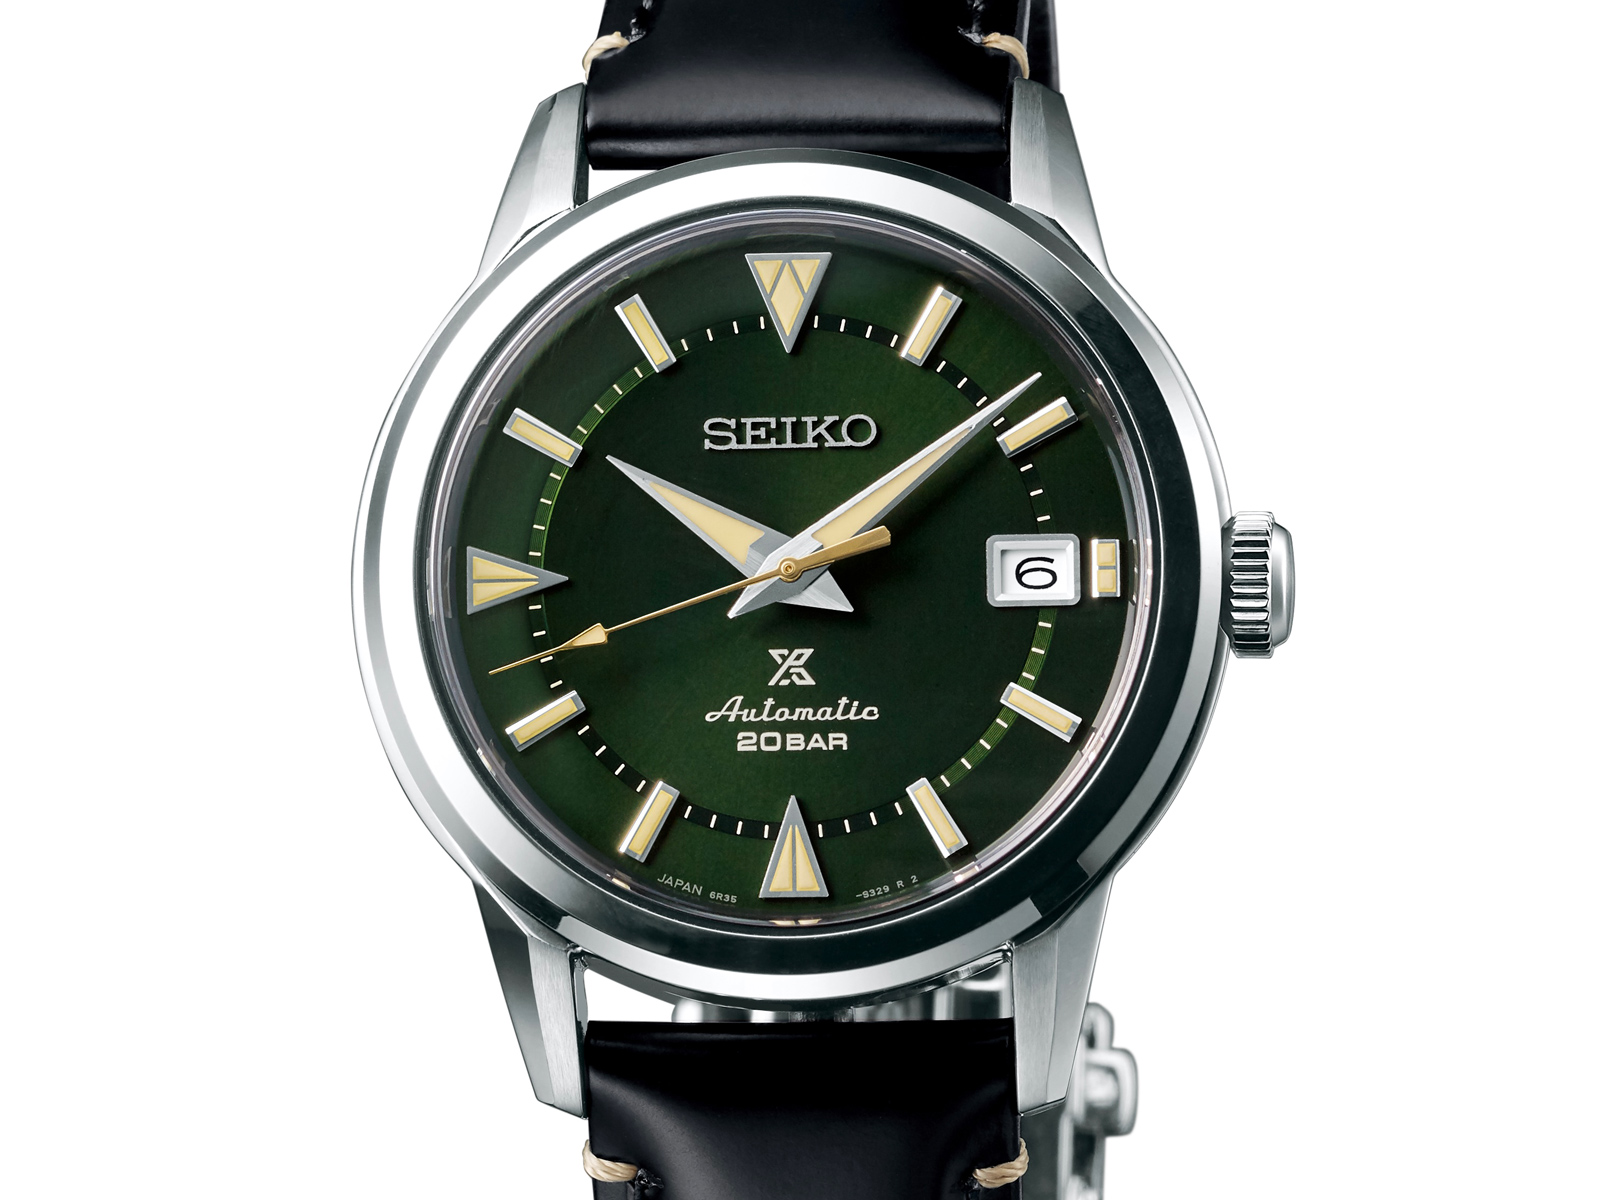 Seiko Remakes the Mountaineer's Watch of 1959 | SJX Watches